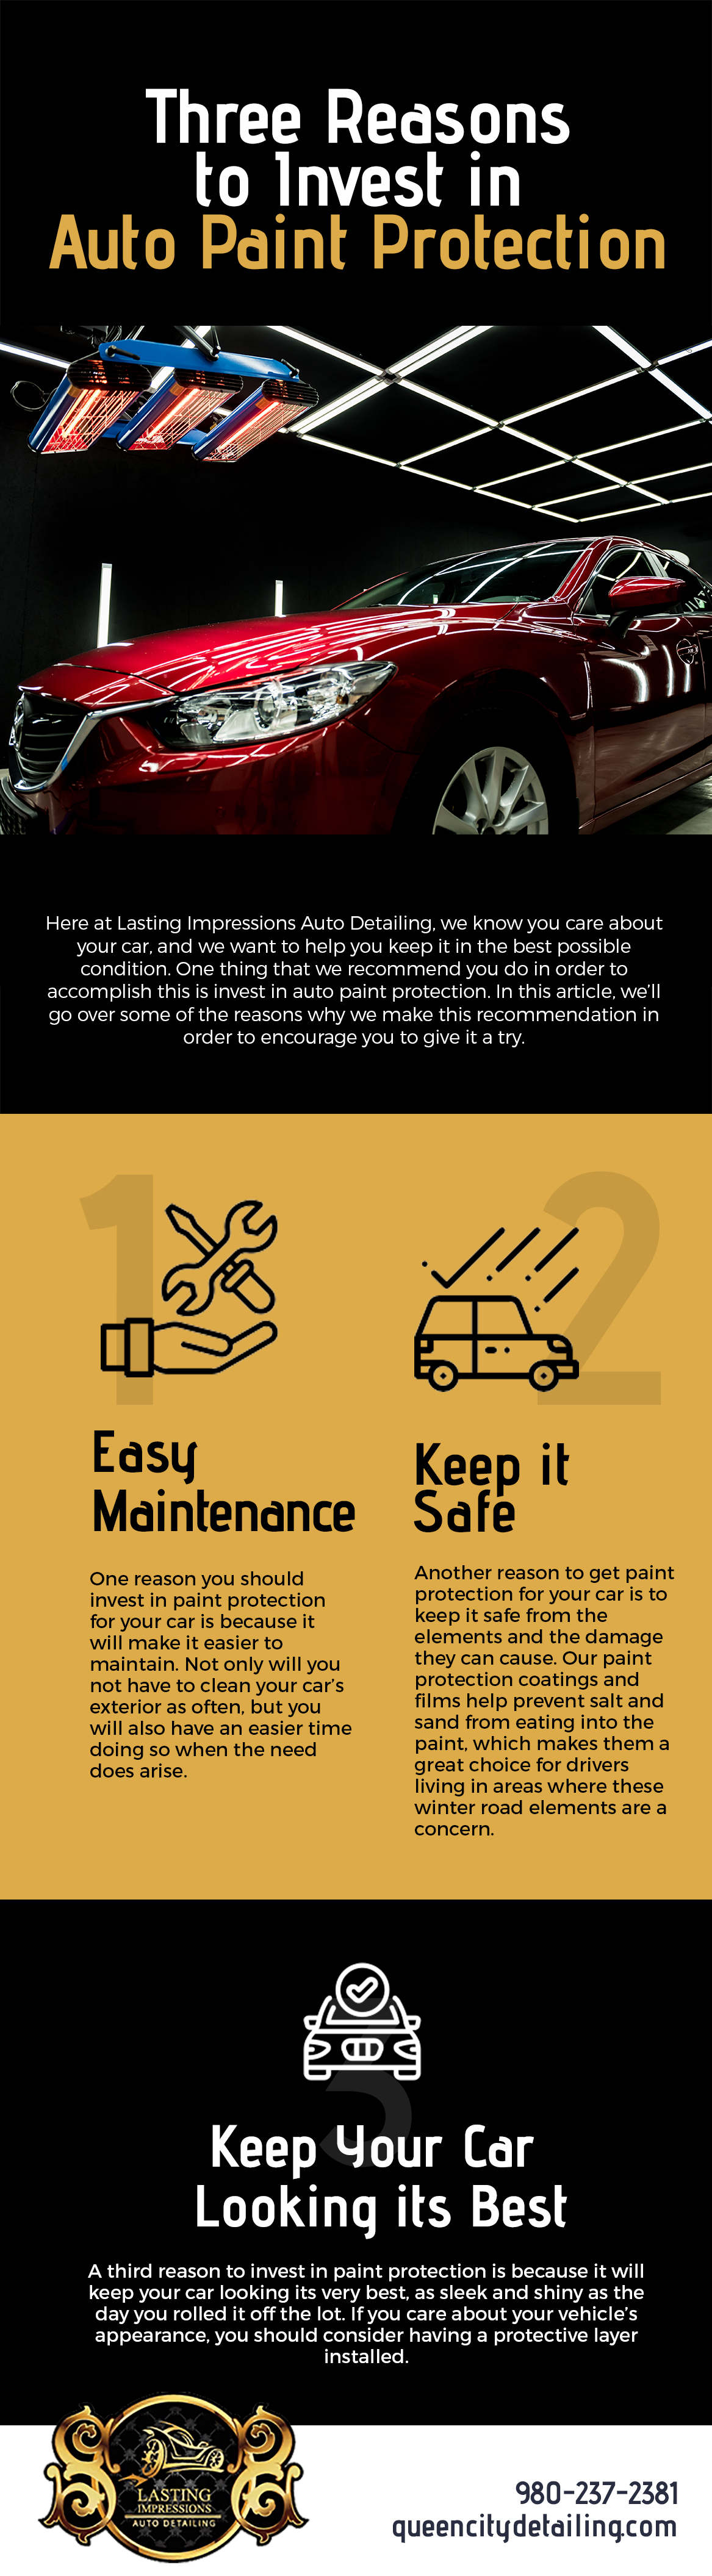 Three Reasons to Invest in Auto Paint Protection [infographic]